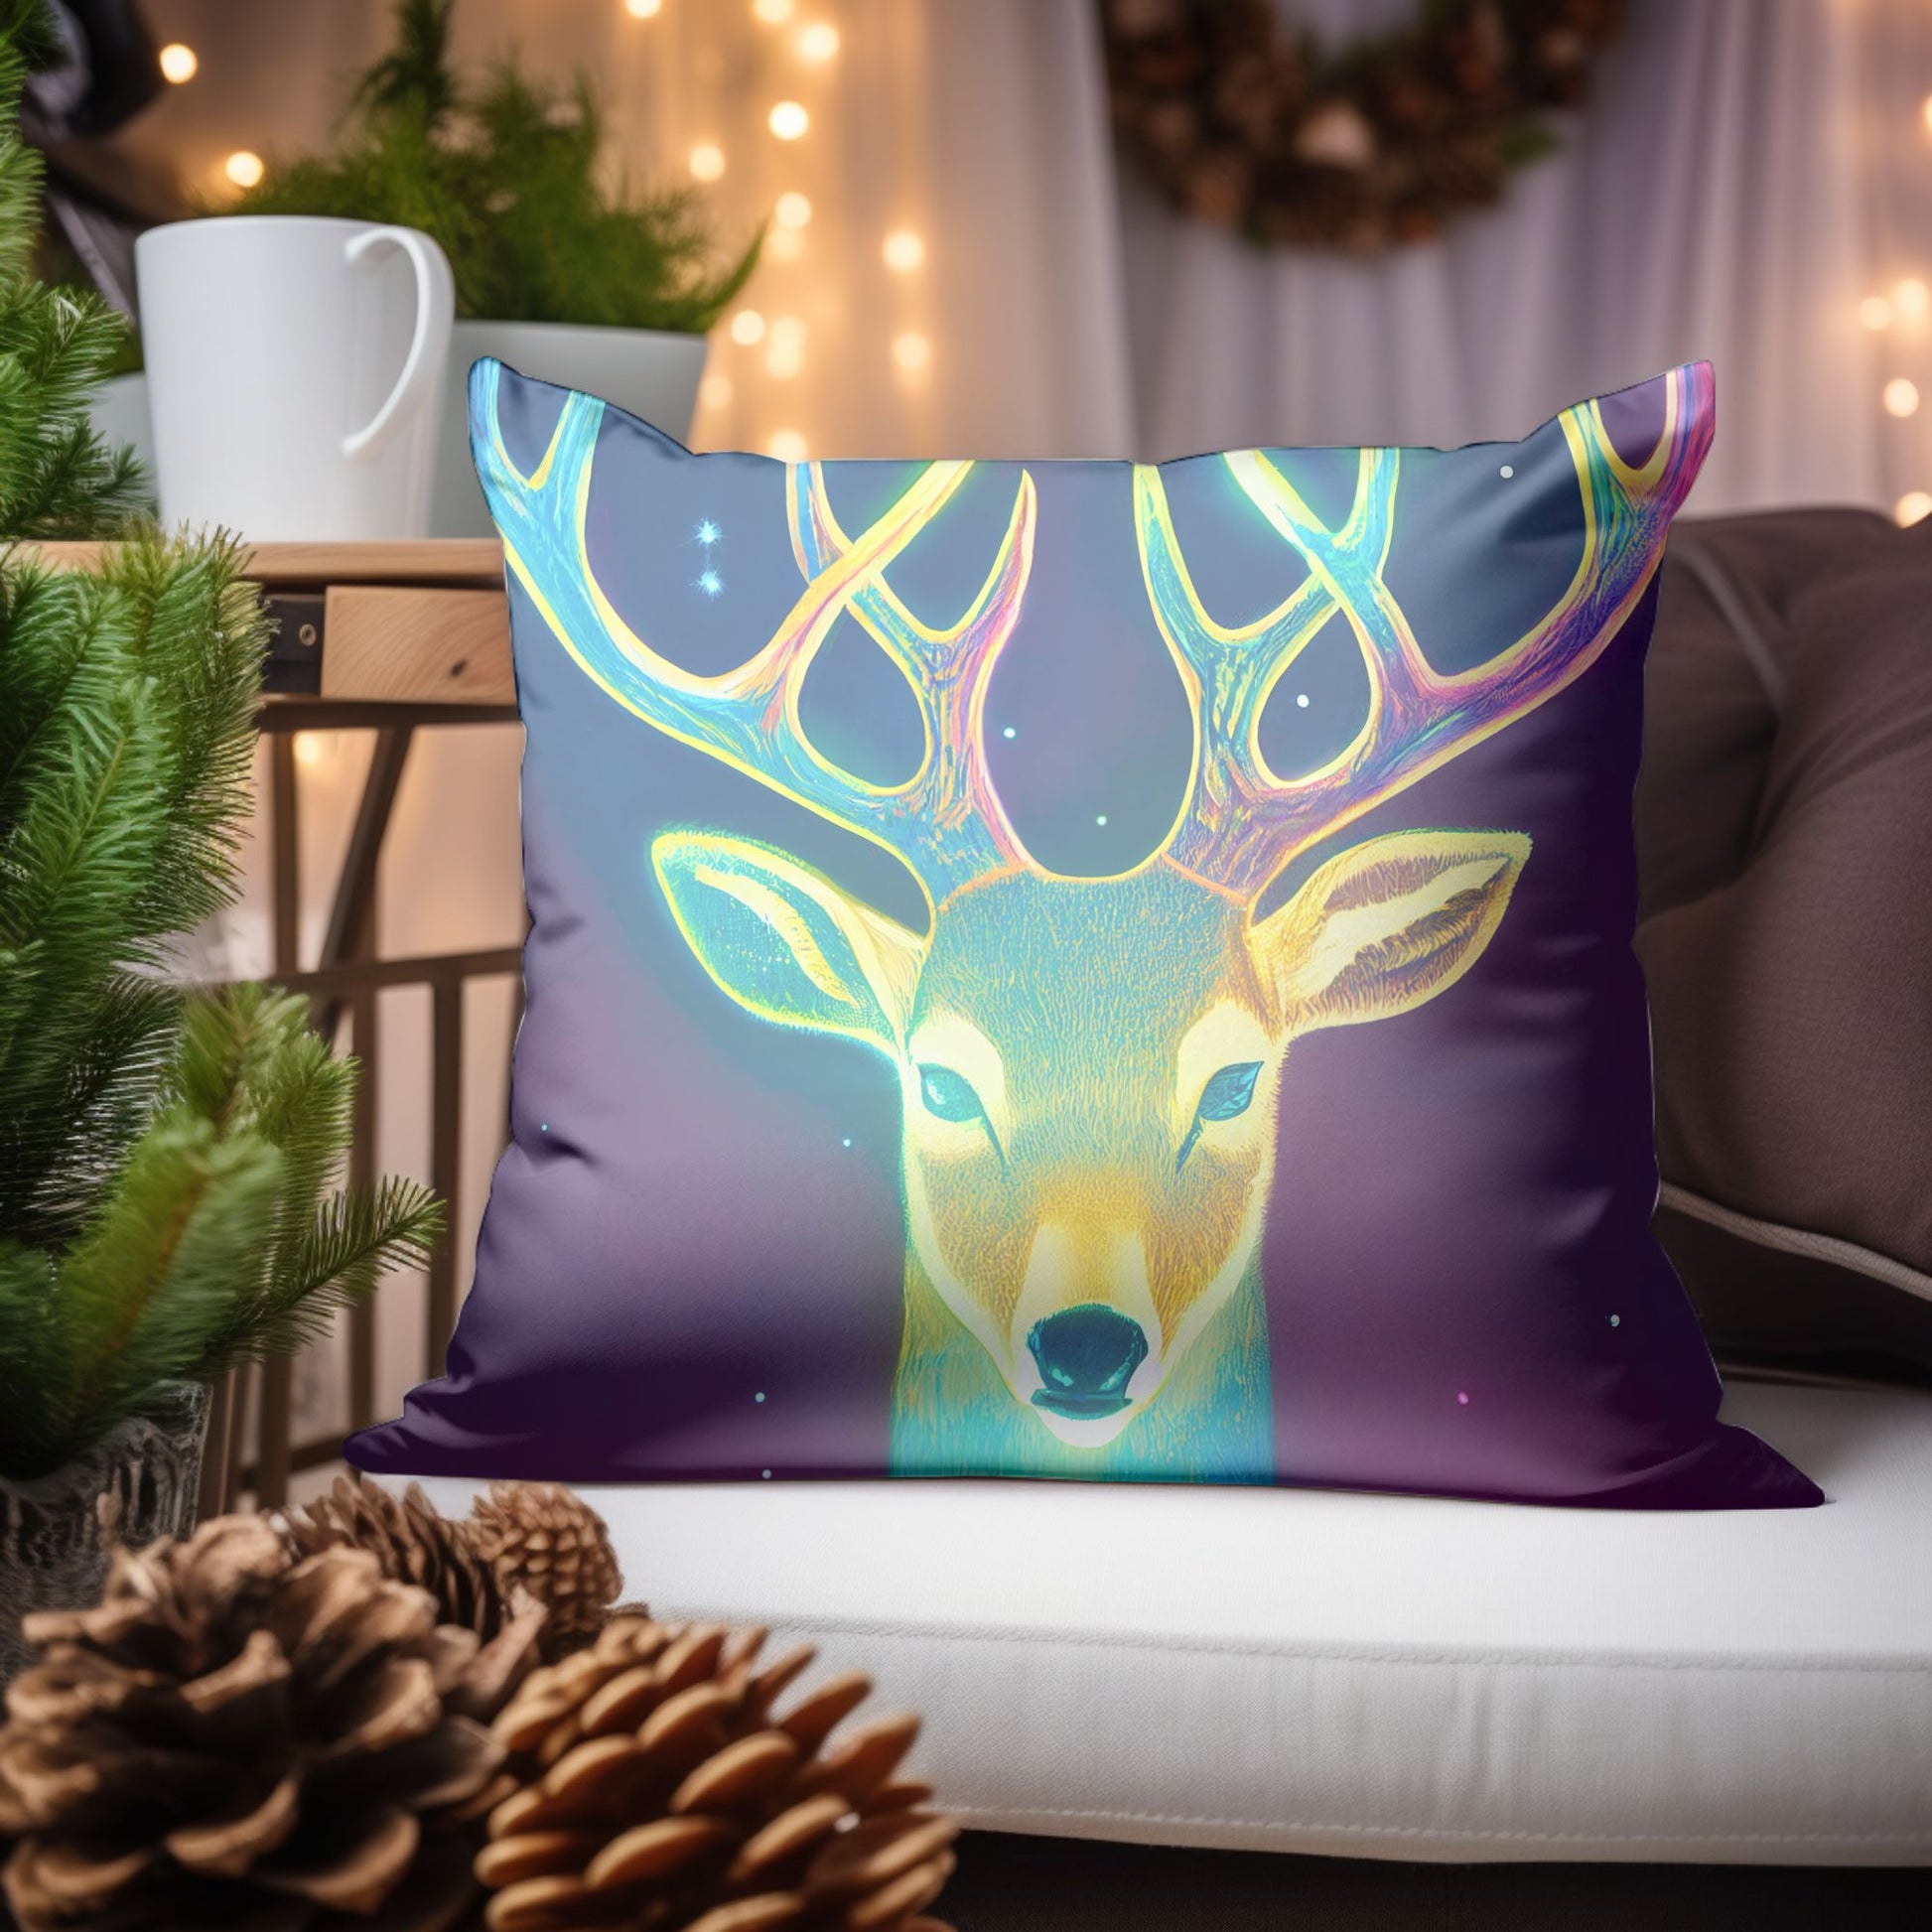 Christmas-Themed Pillow Cover with Cheerful Reindeer Artwork